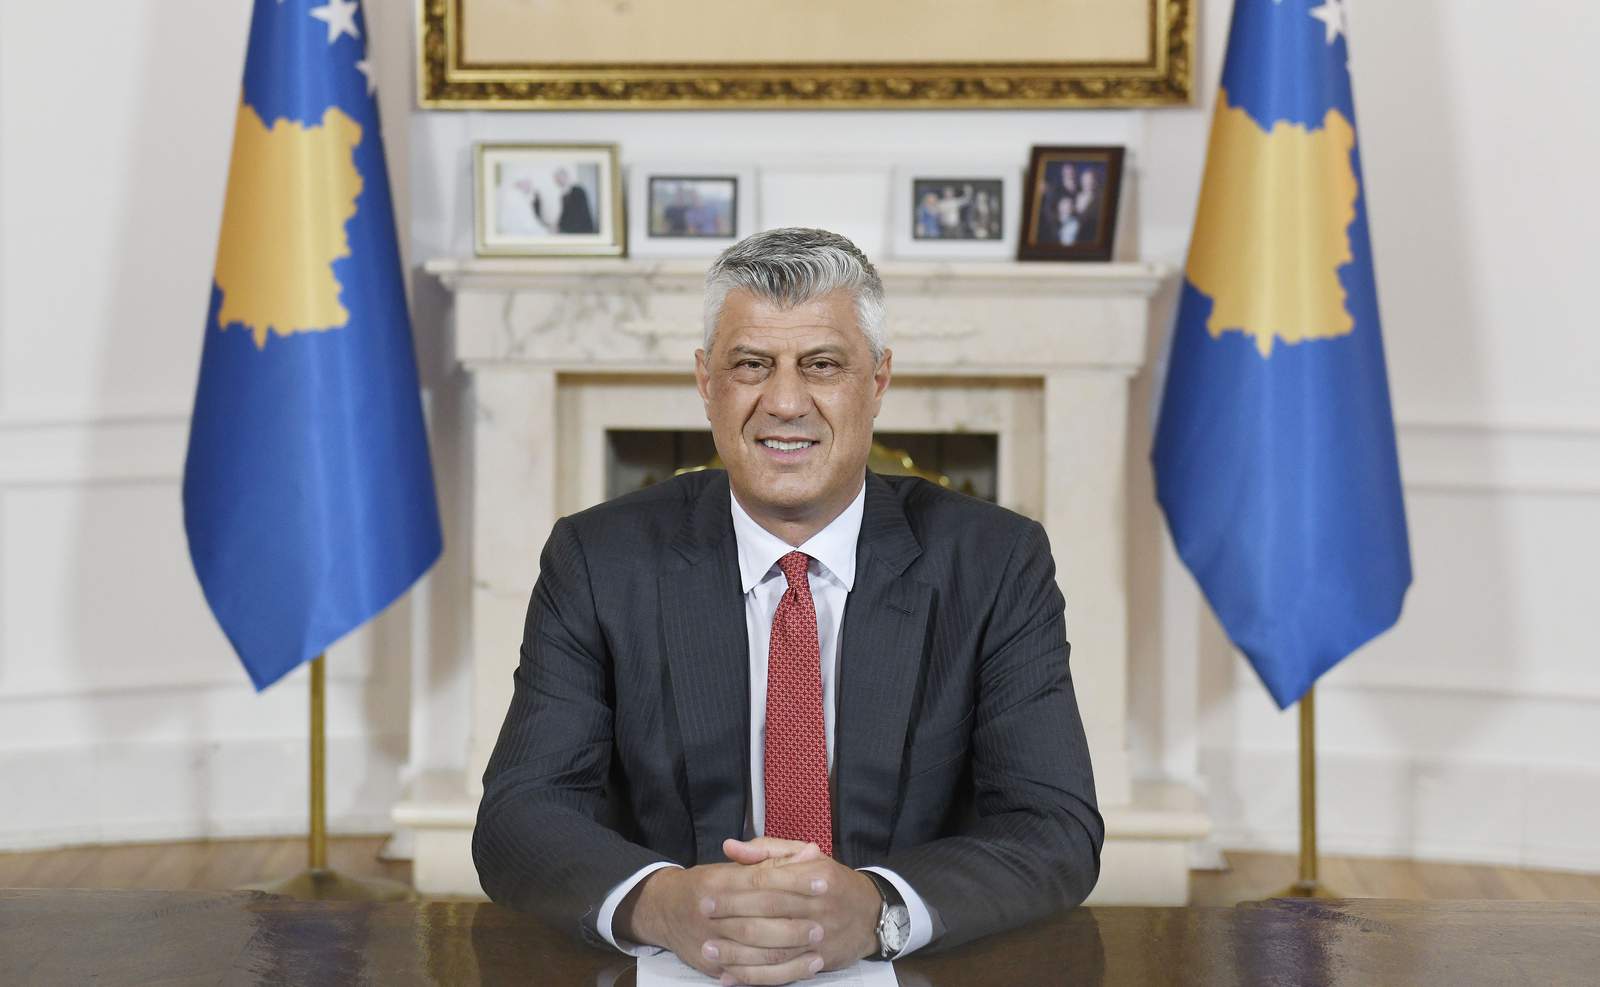 Kosovo’s Thaci strongly denies committing any war crimes